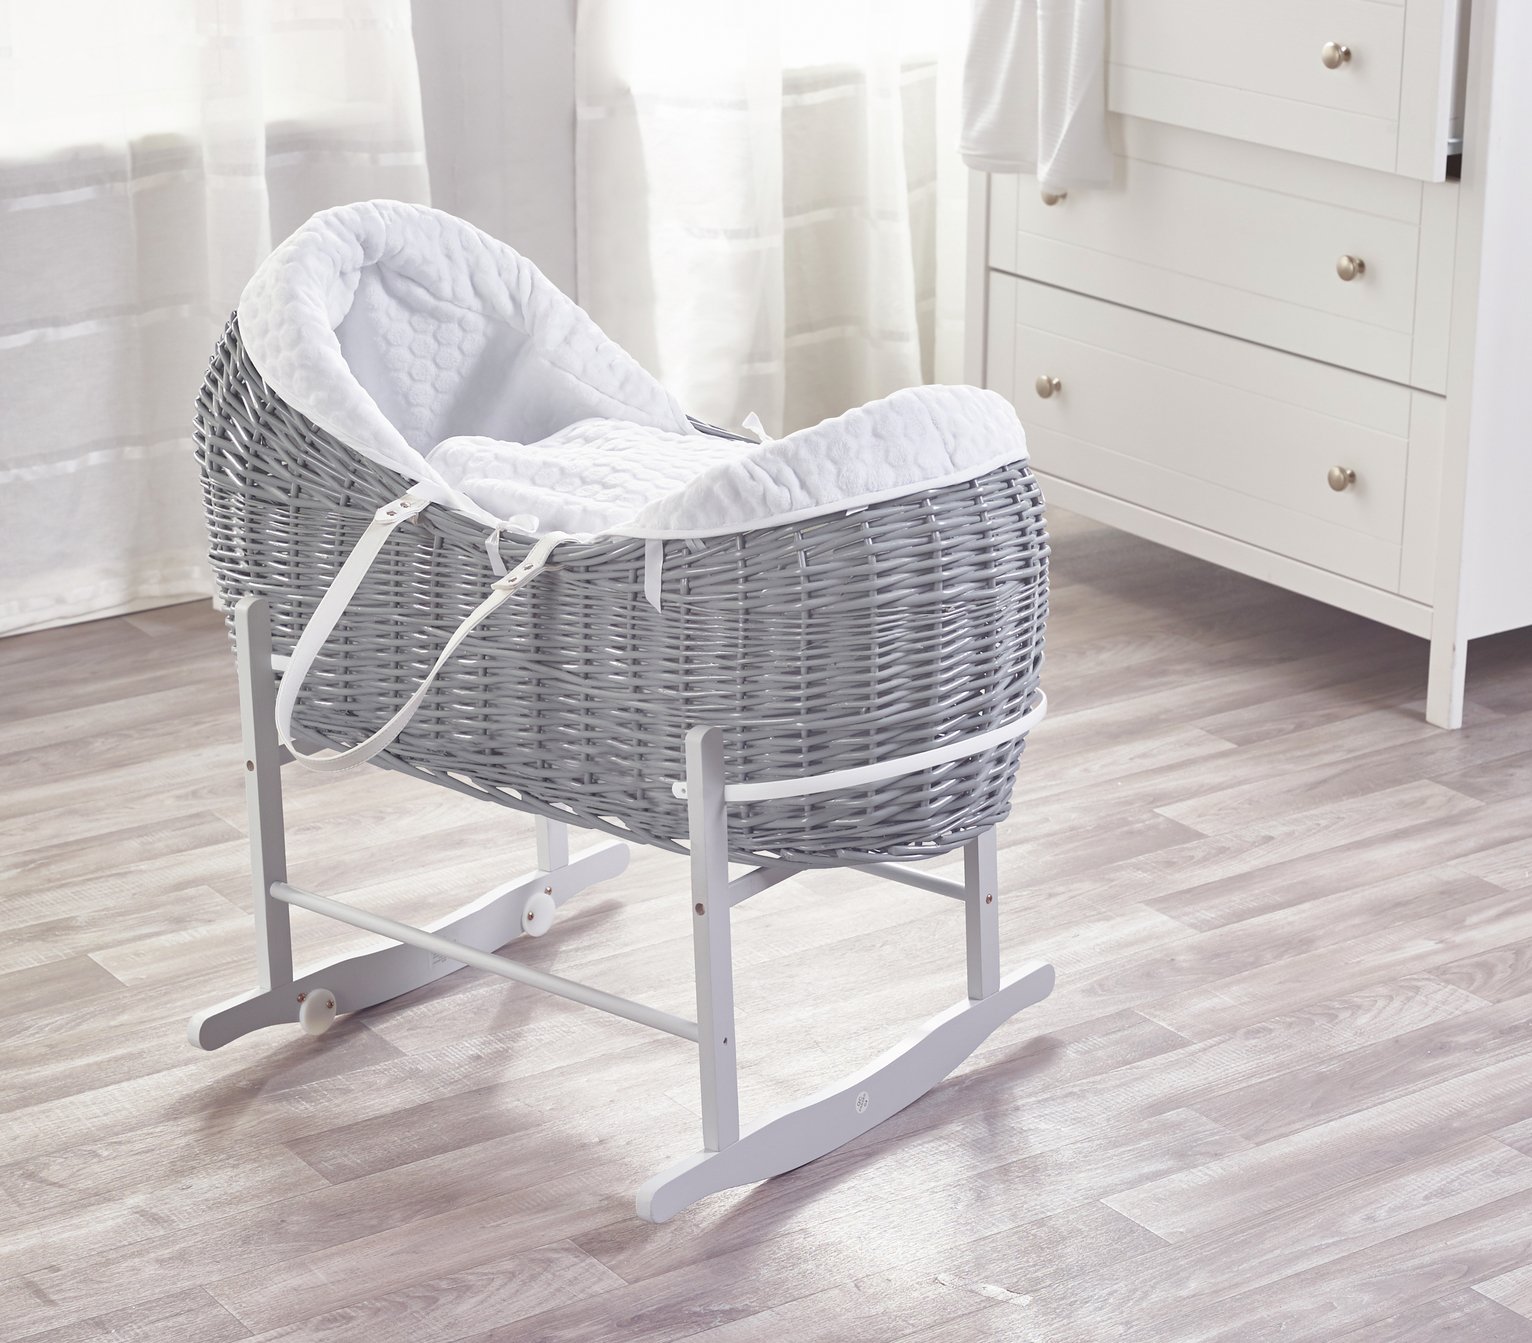 White Honeycomb Wicker Pod Basket and Rocker Review